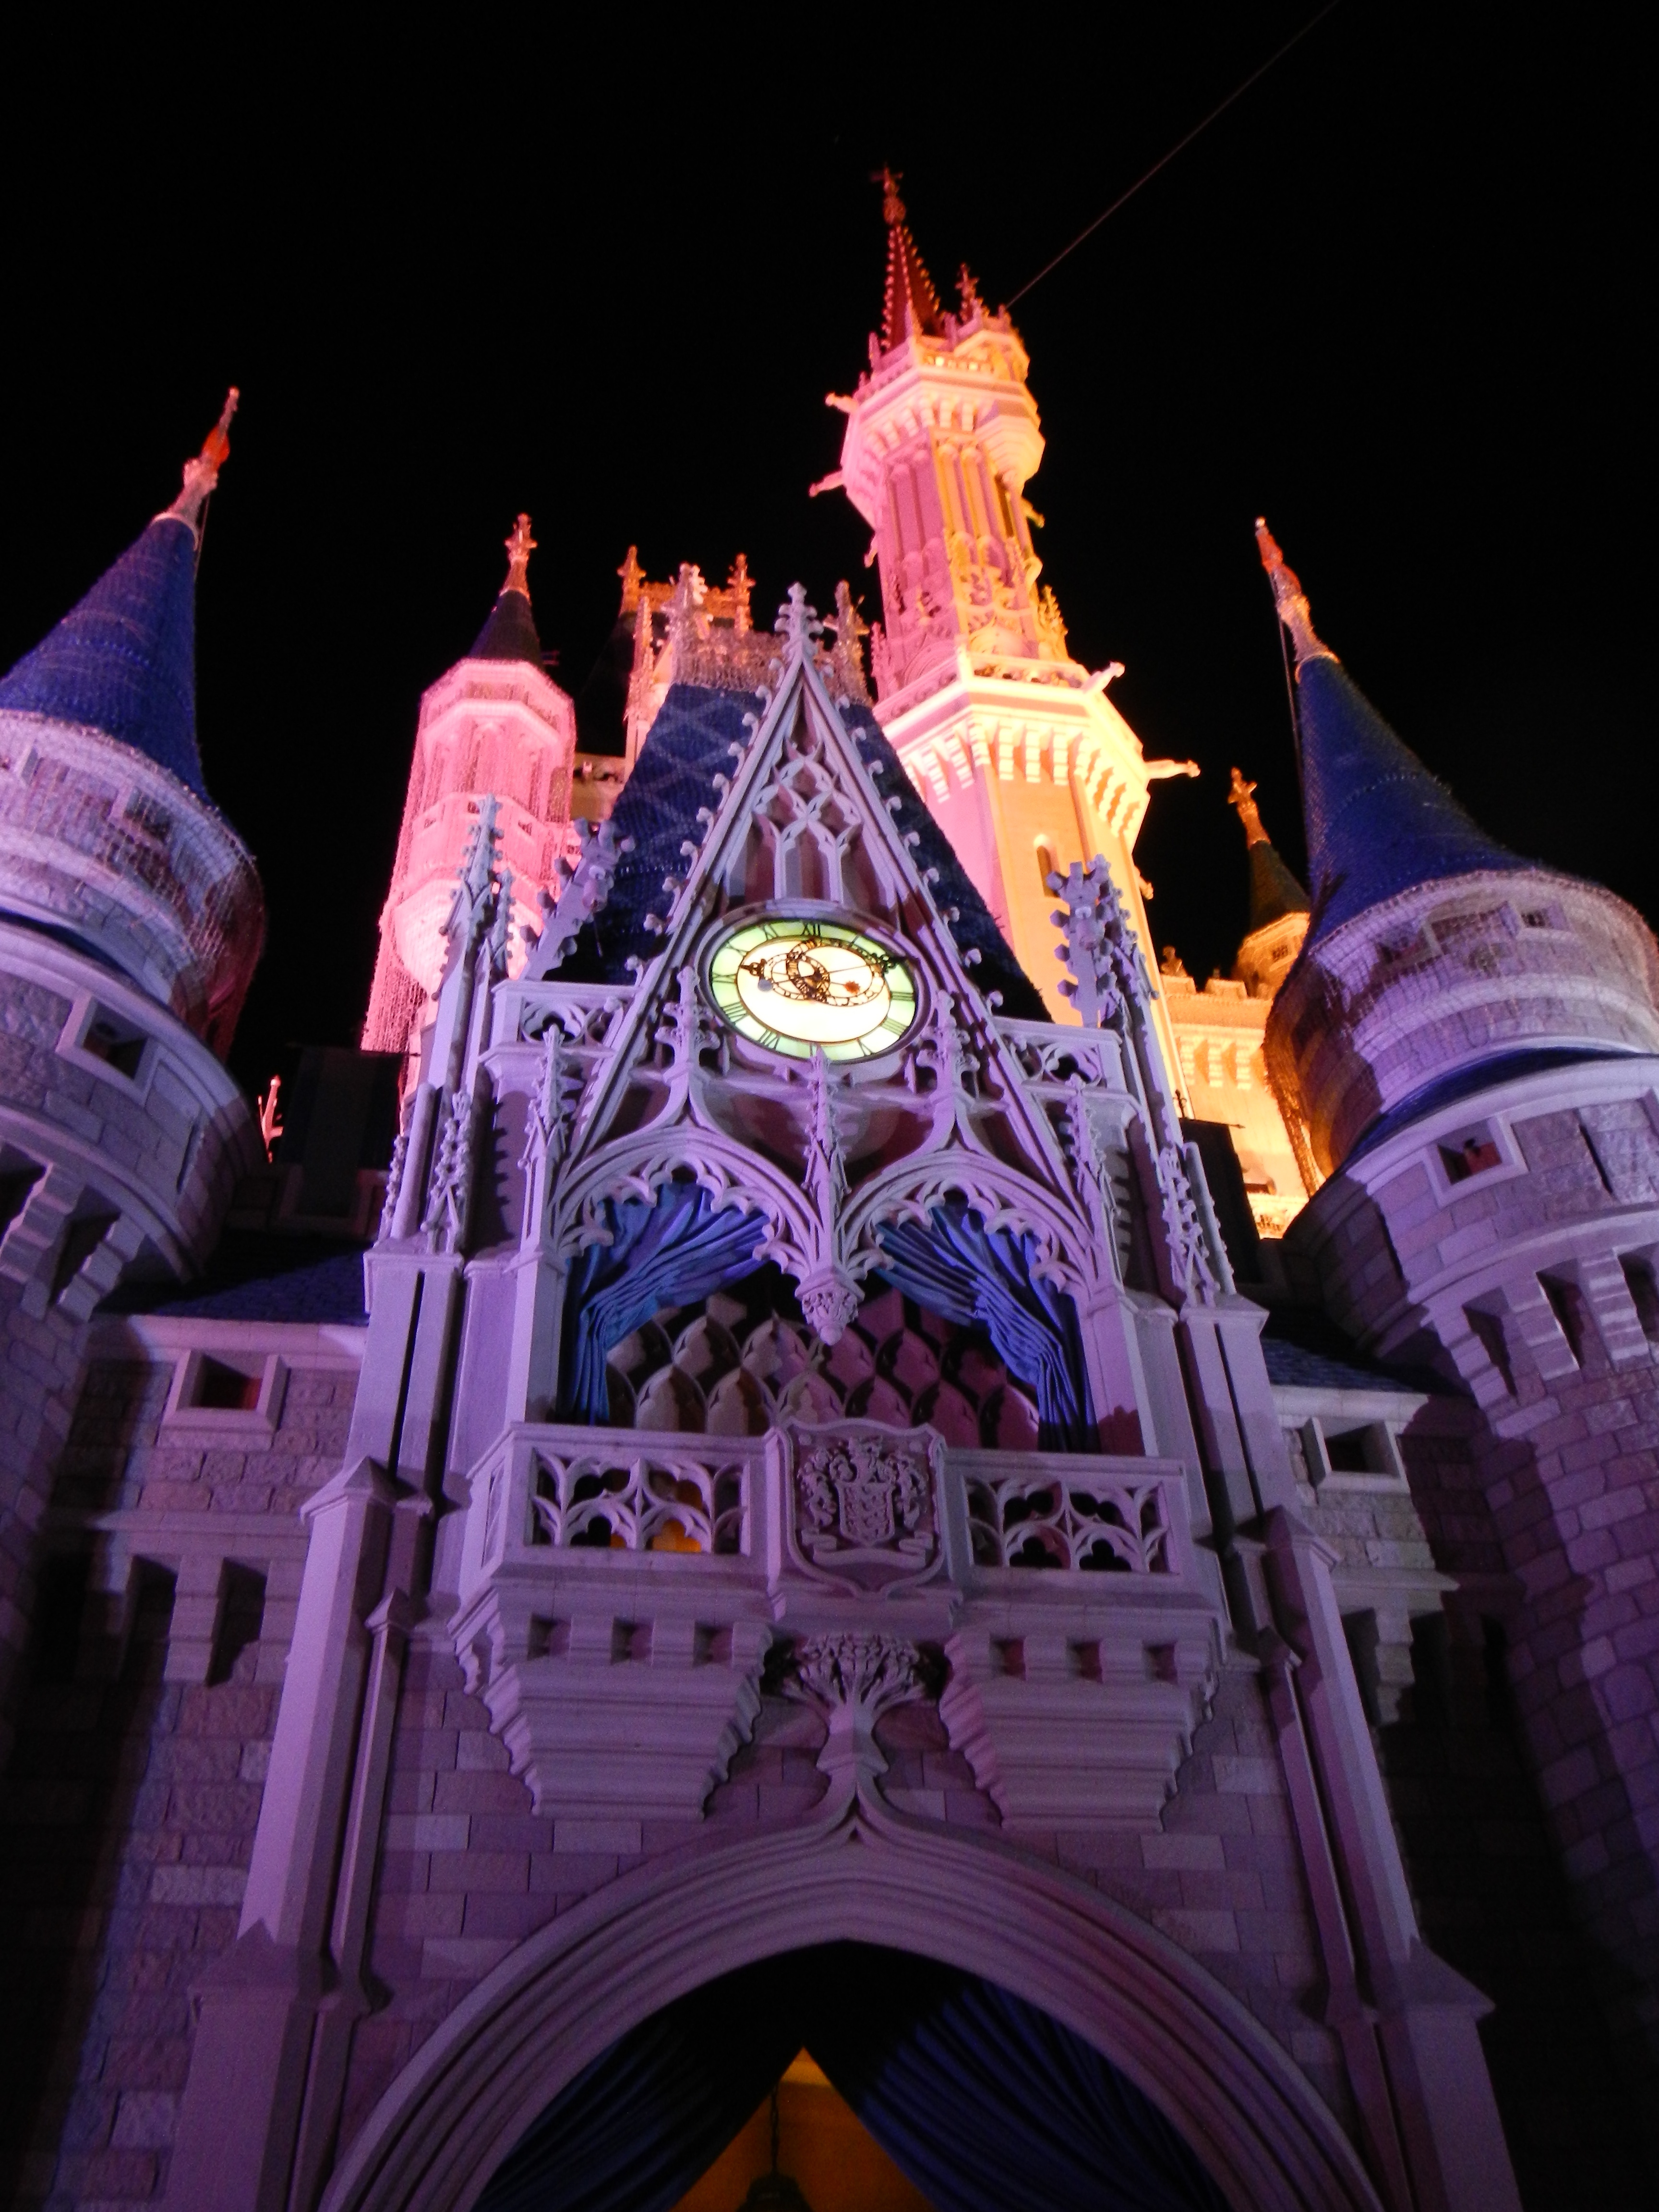 The nighttime images of the Cinderella's Castle are pretty cool.